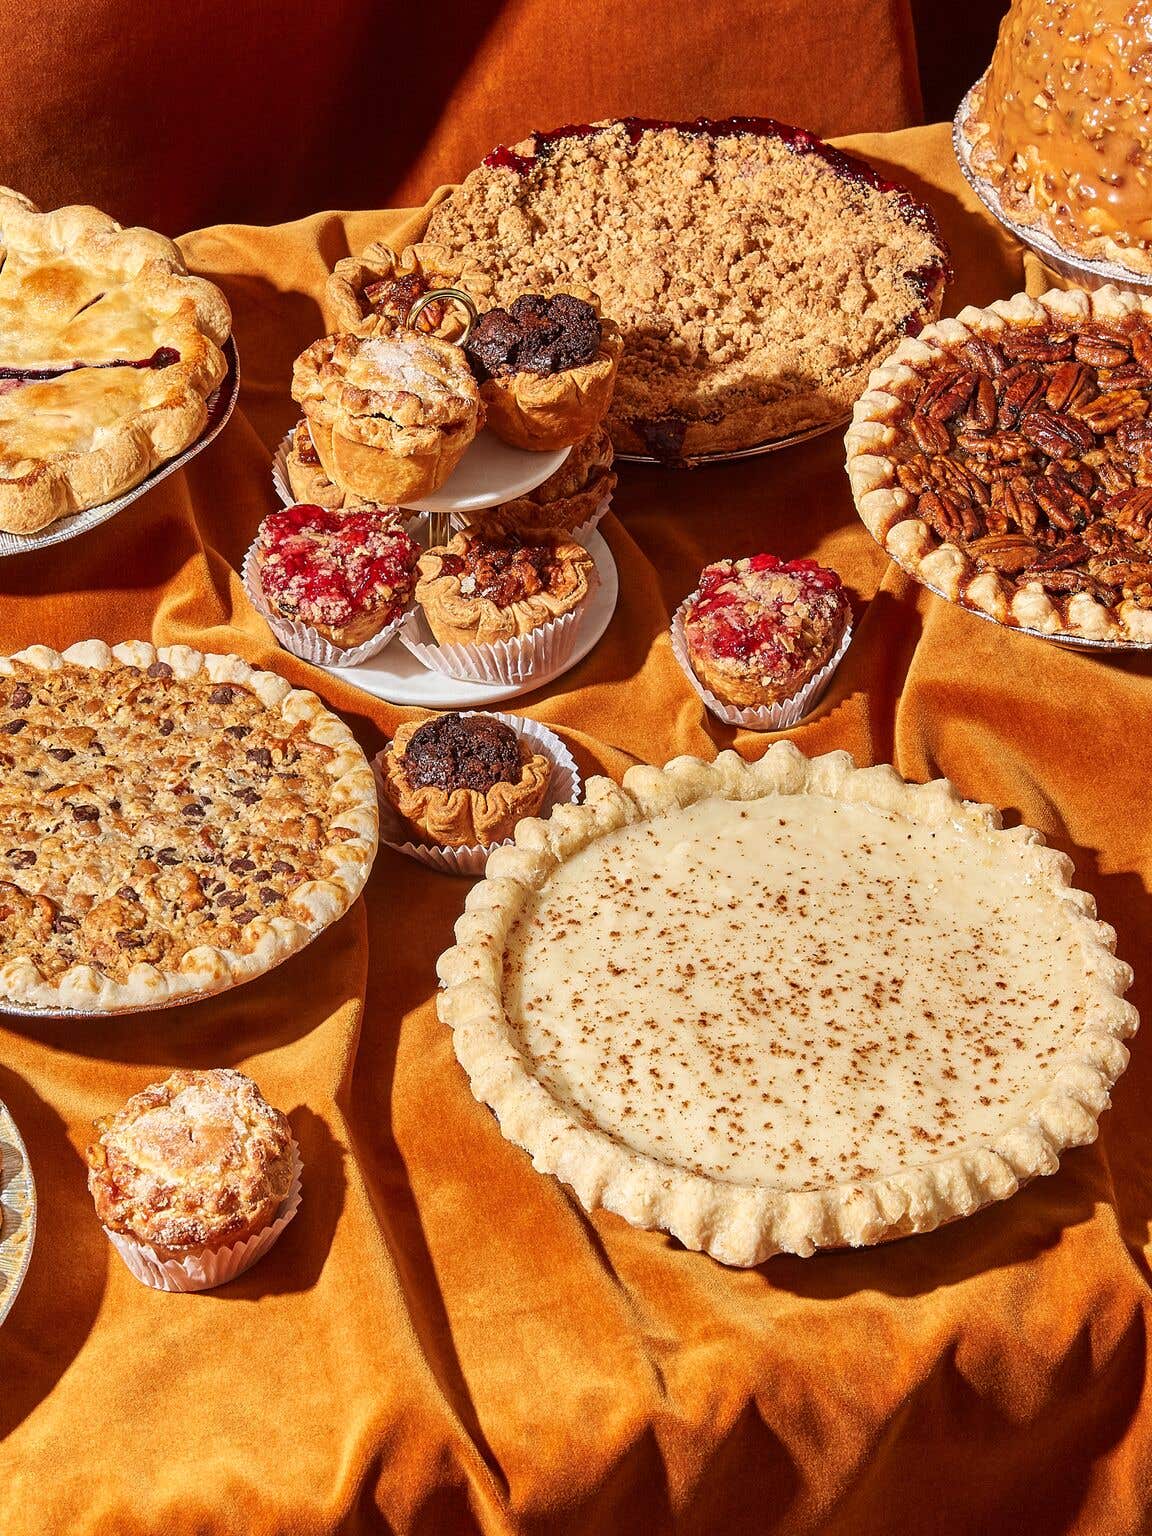 The 7 Best Mail-Order Pies for Those Who Can’t Bake